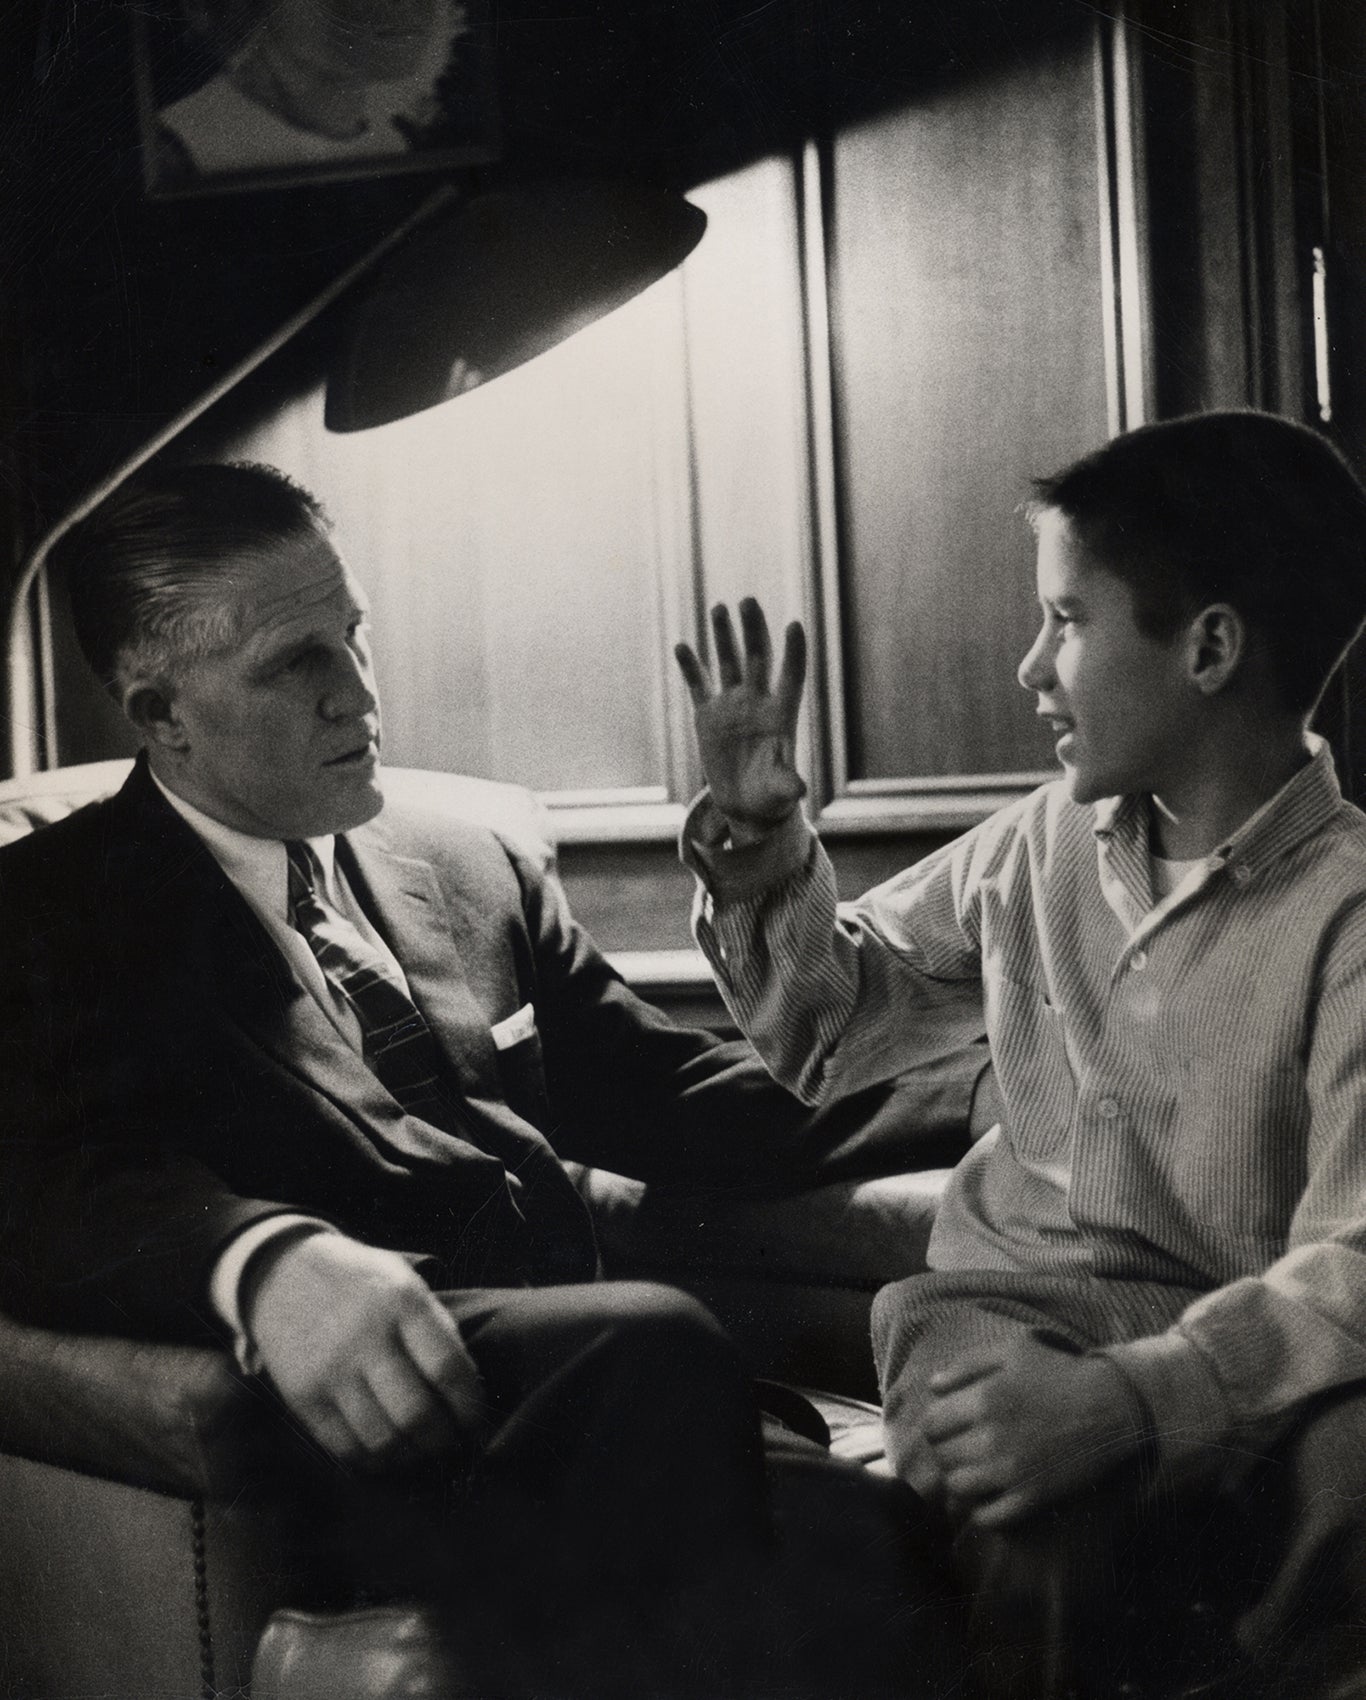 2008 Republican presidential candidate Mitt Romney in an archive family photo with his father George in their Michigan family home in 1957. (Photo by Brooks Kraft LLC/Corbis via Getty Images)